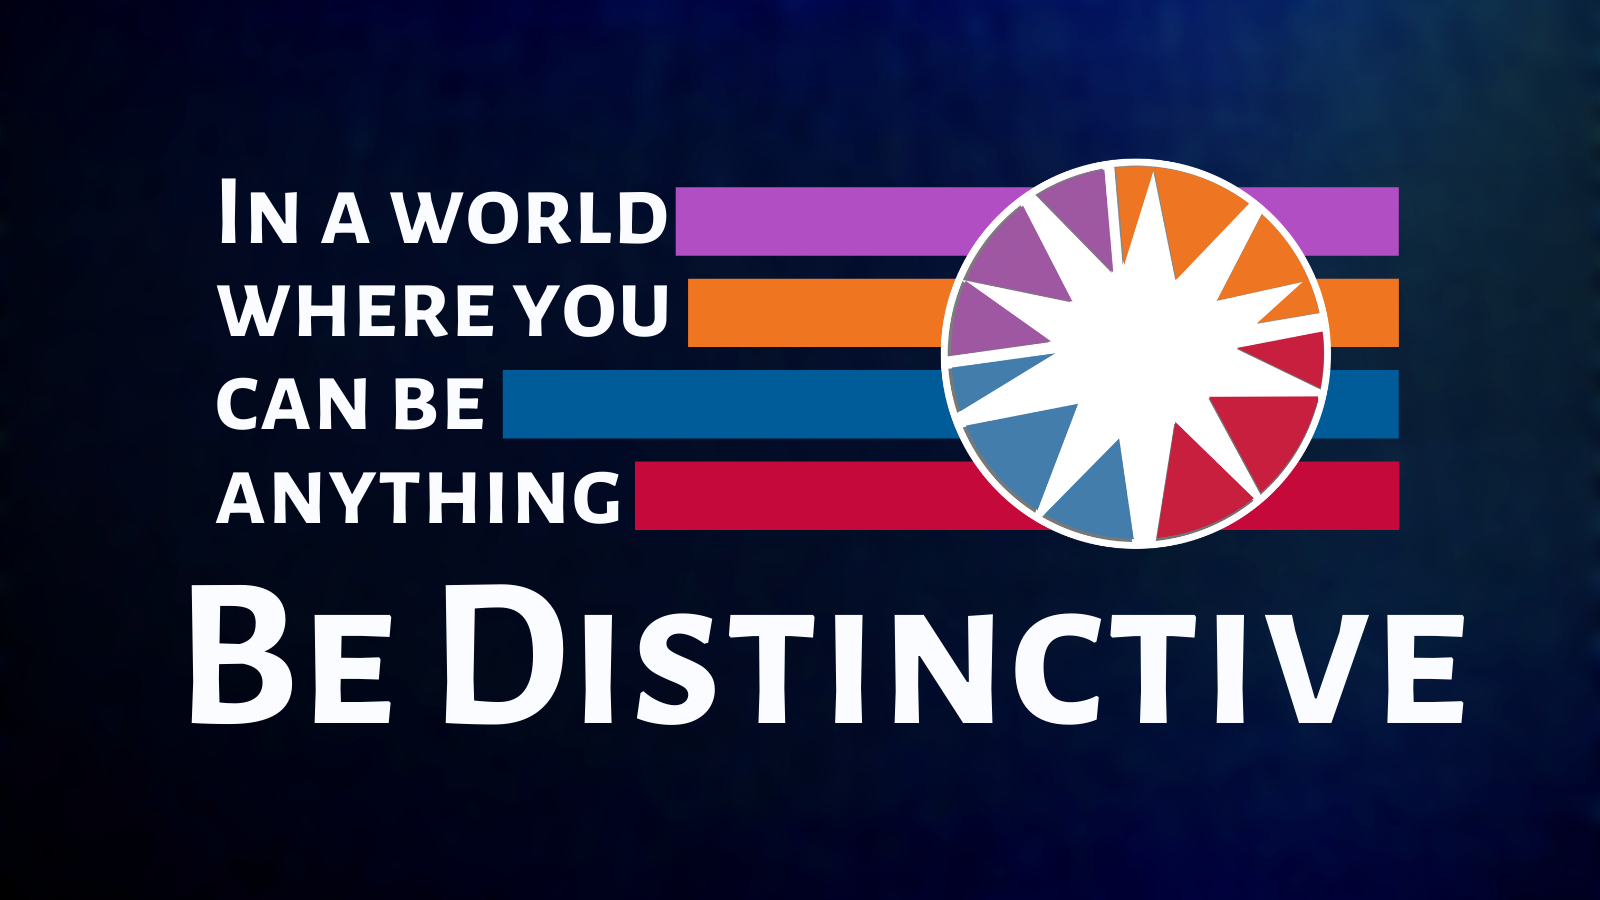 In a world where you can be anything, Be Distinctive.